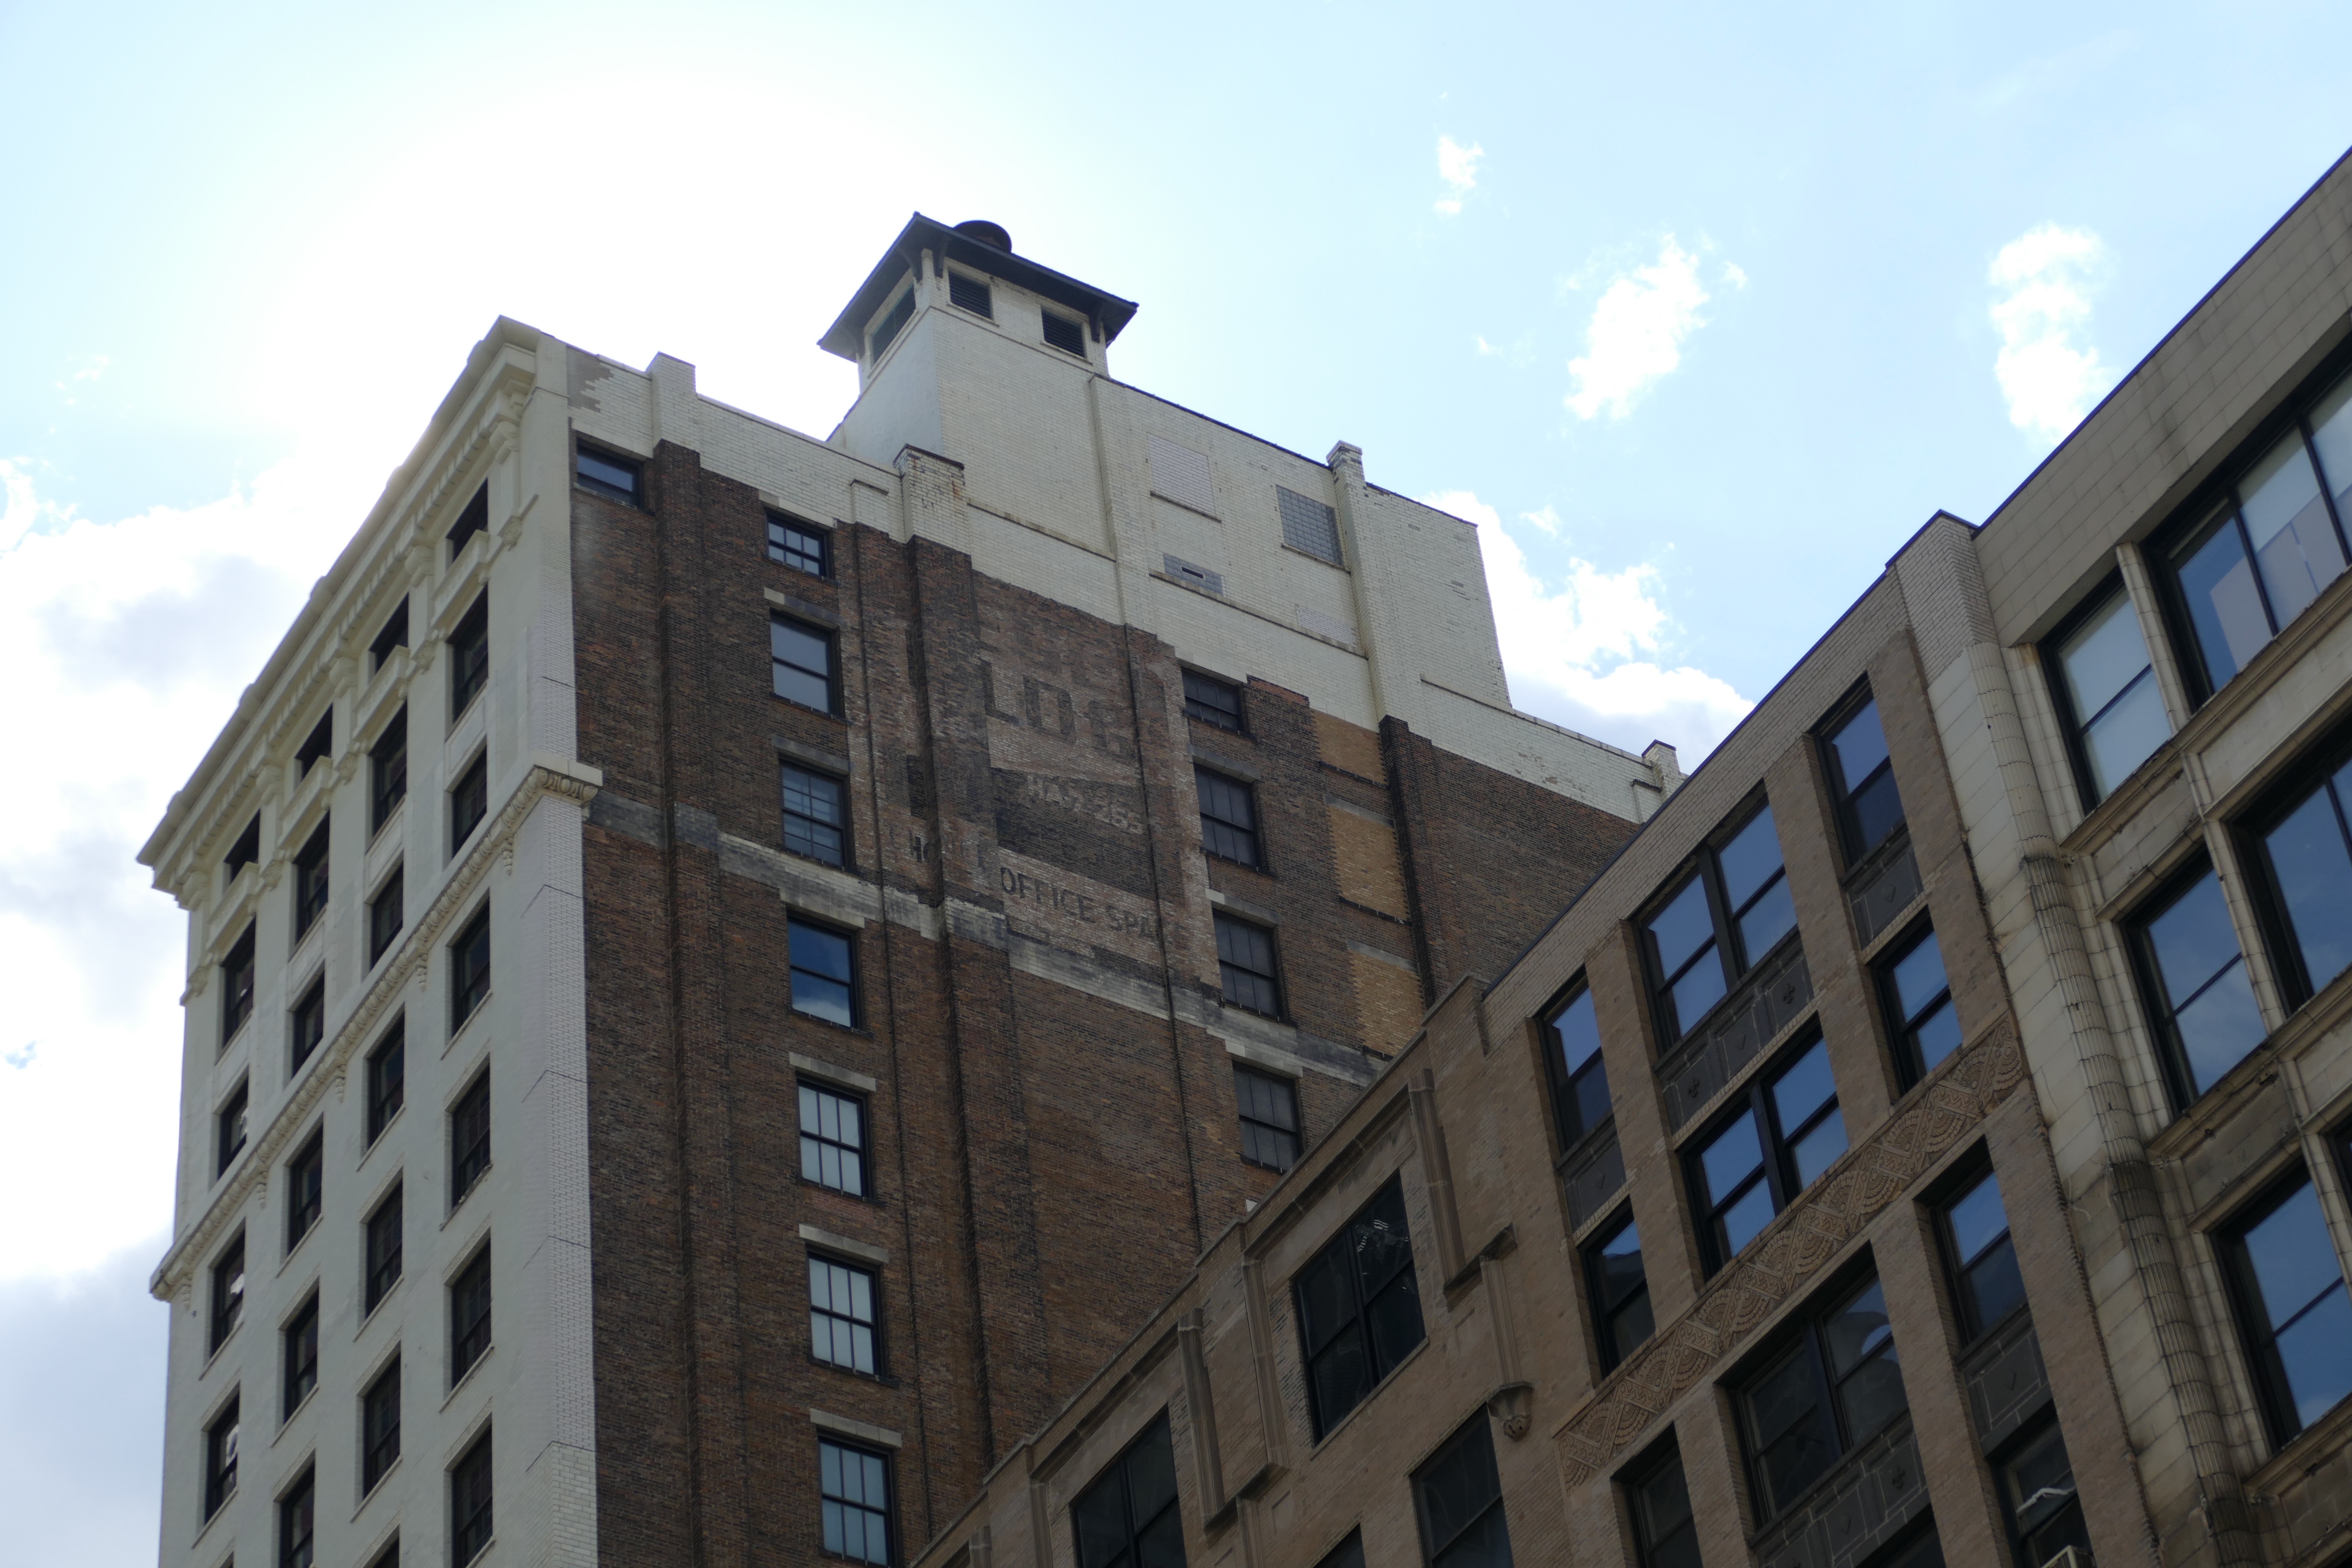 The faded office space advertisement on the Chicago landmark Steger Building. (Photo courtesy of Marissa Nelson)